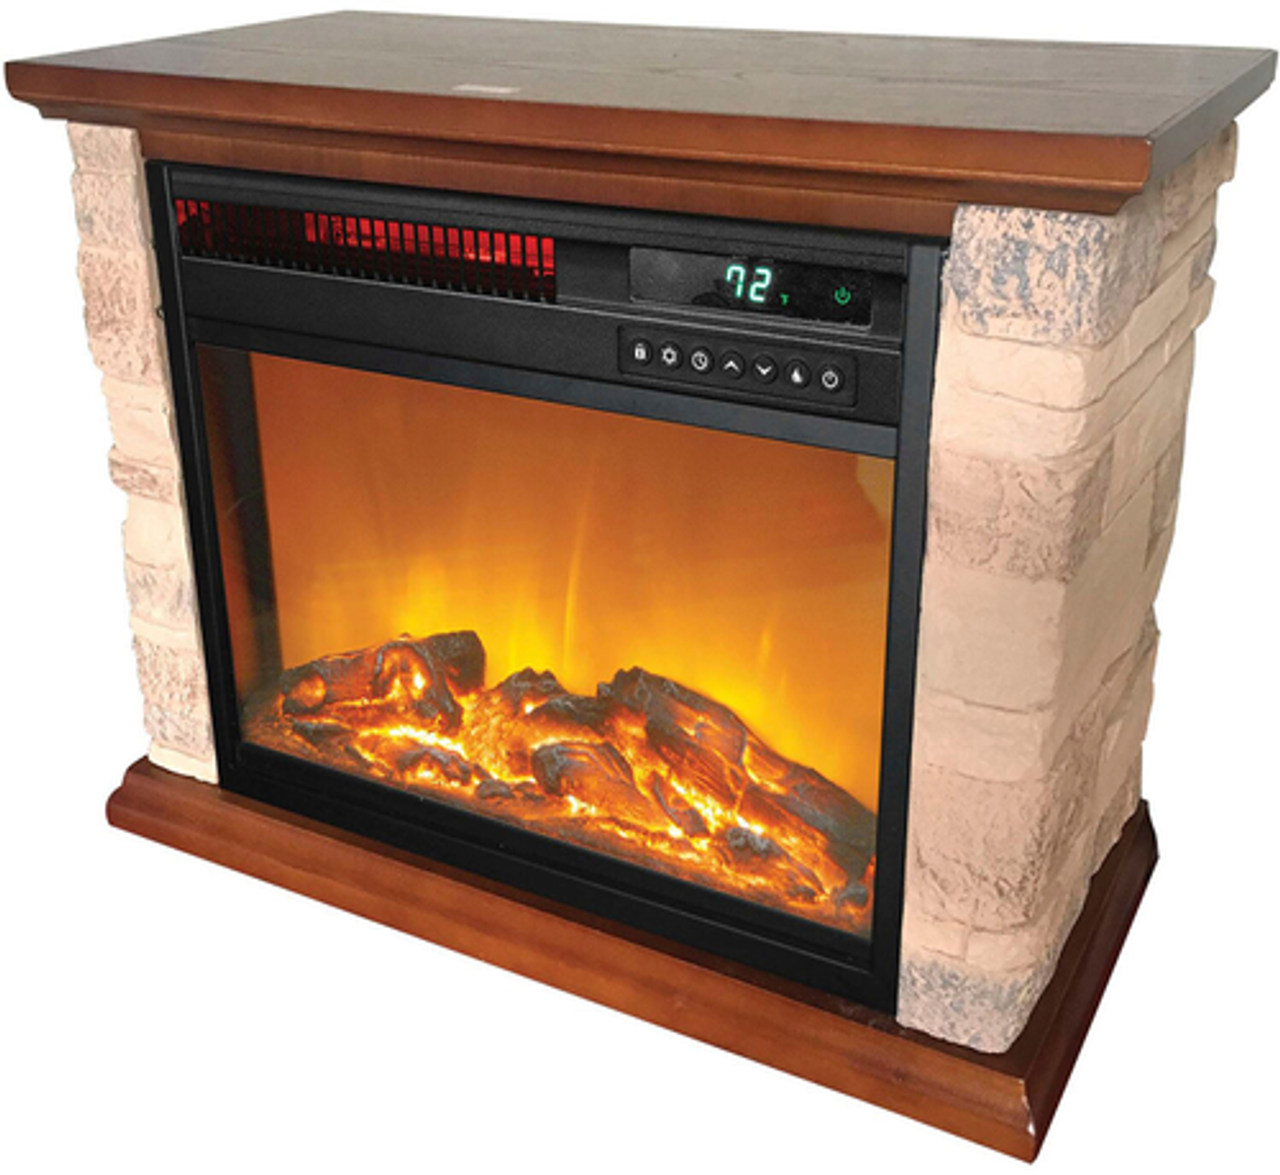 Lifesmart - 3-element Small Square Infrared Fireplace with Faux Stone Accent - Black